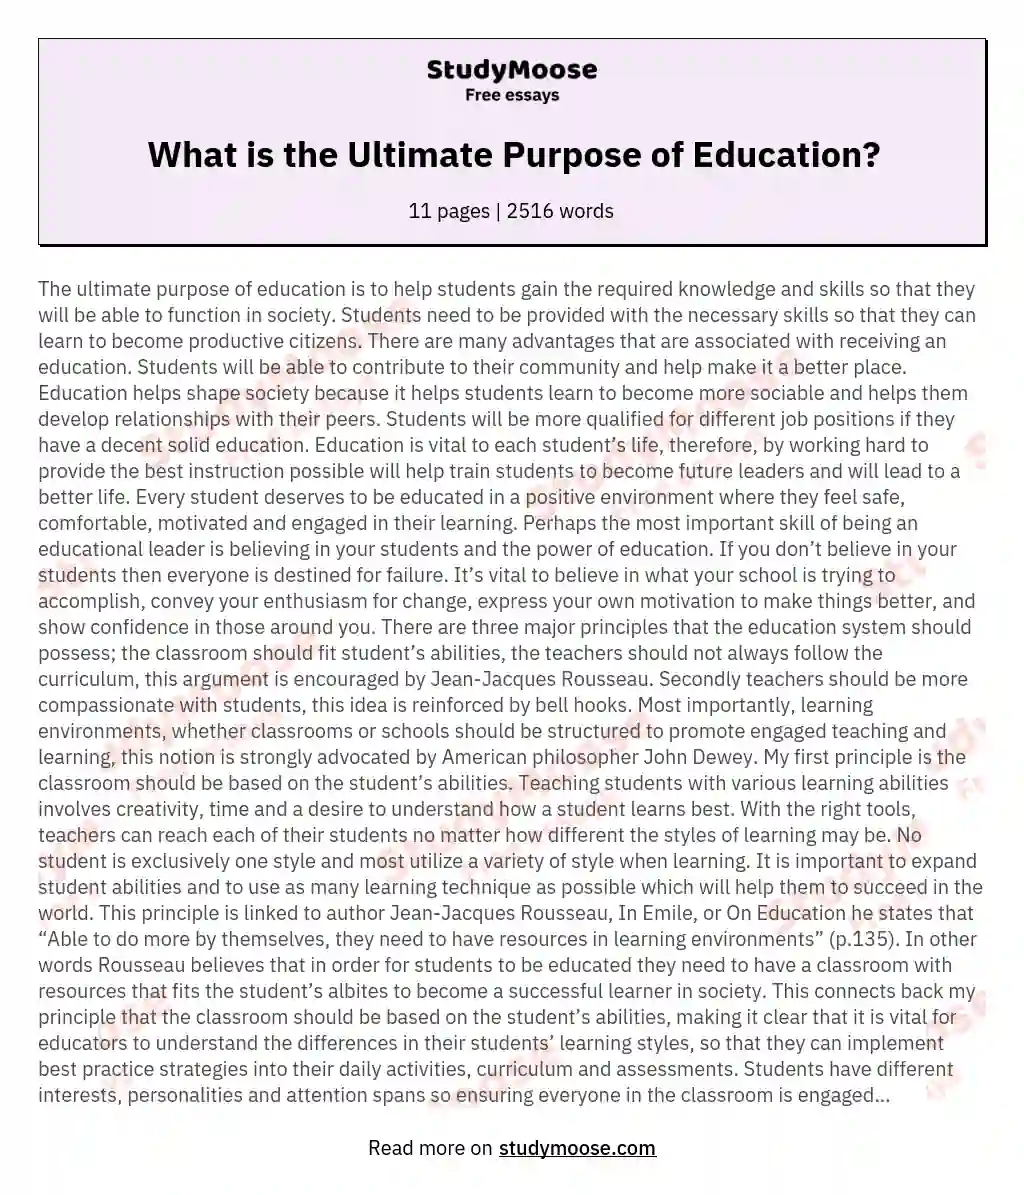 What is the Ultimate Purpose of Education?